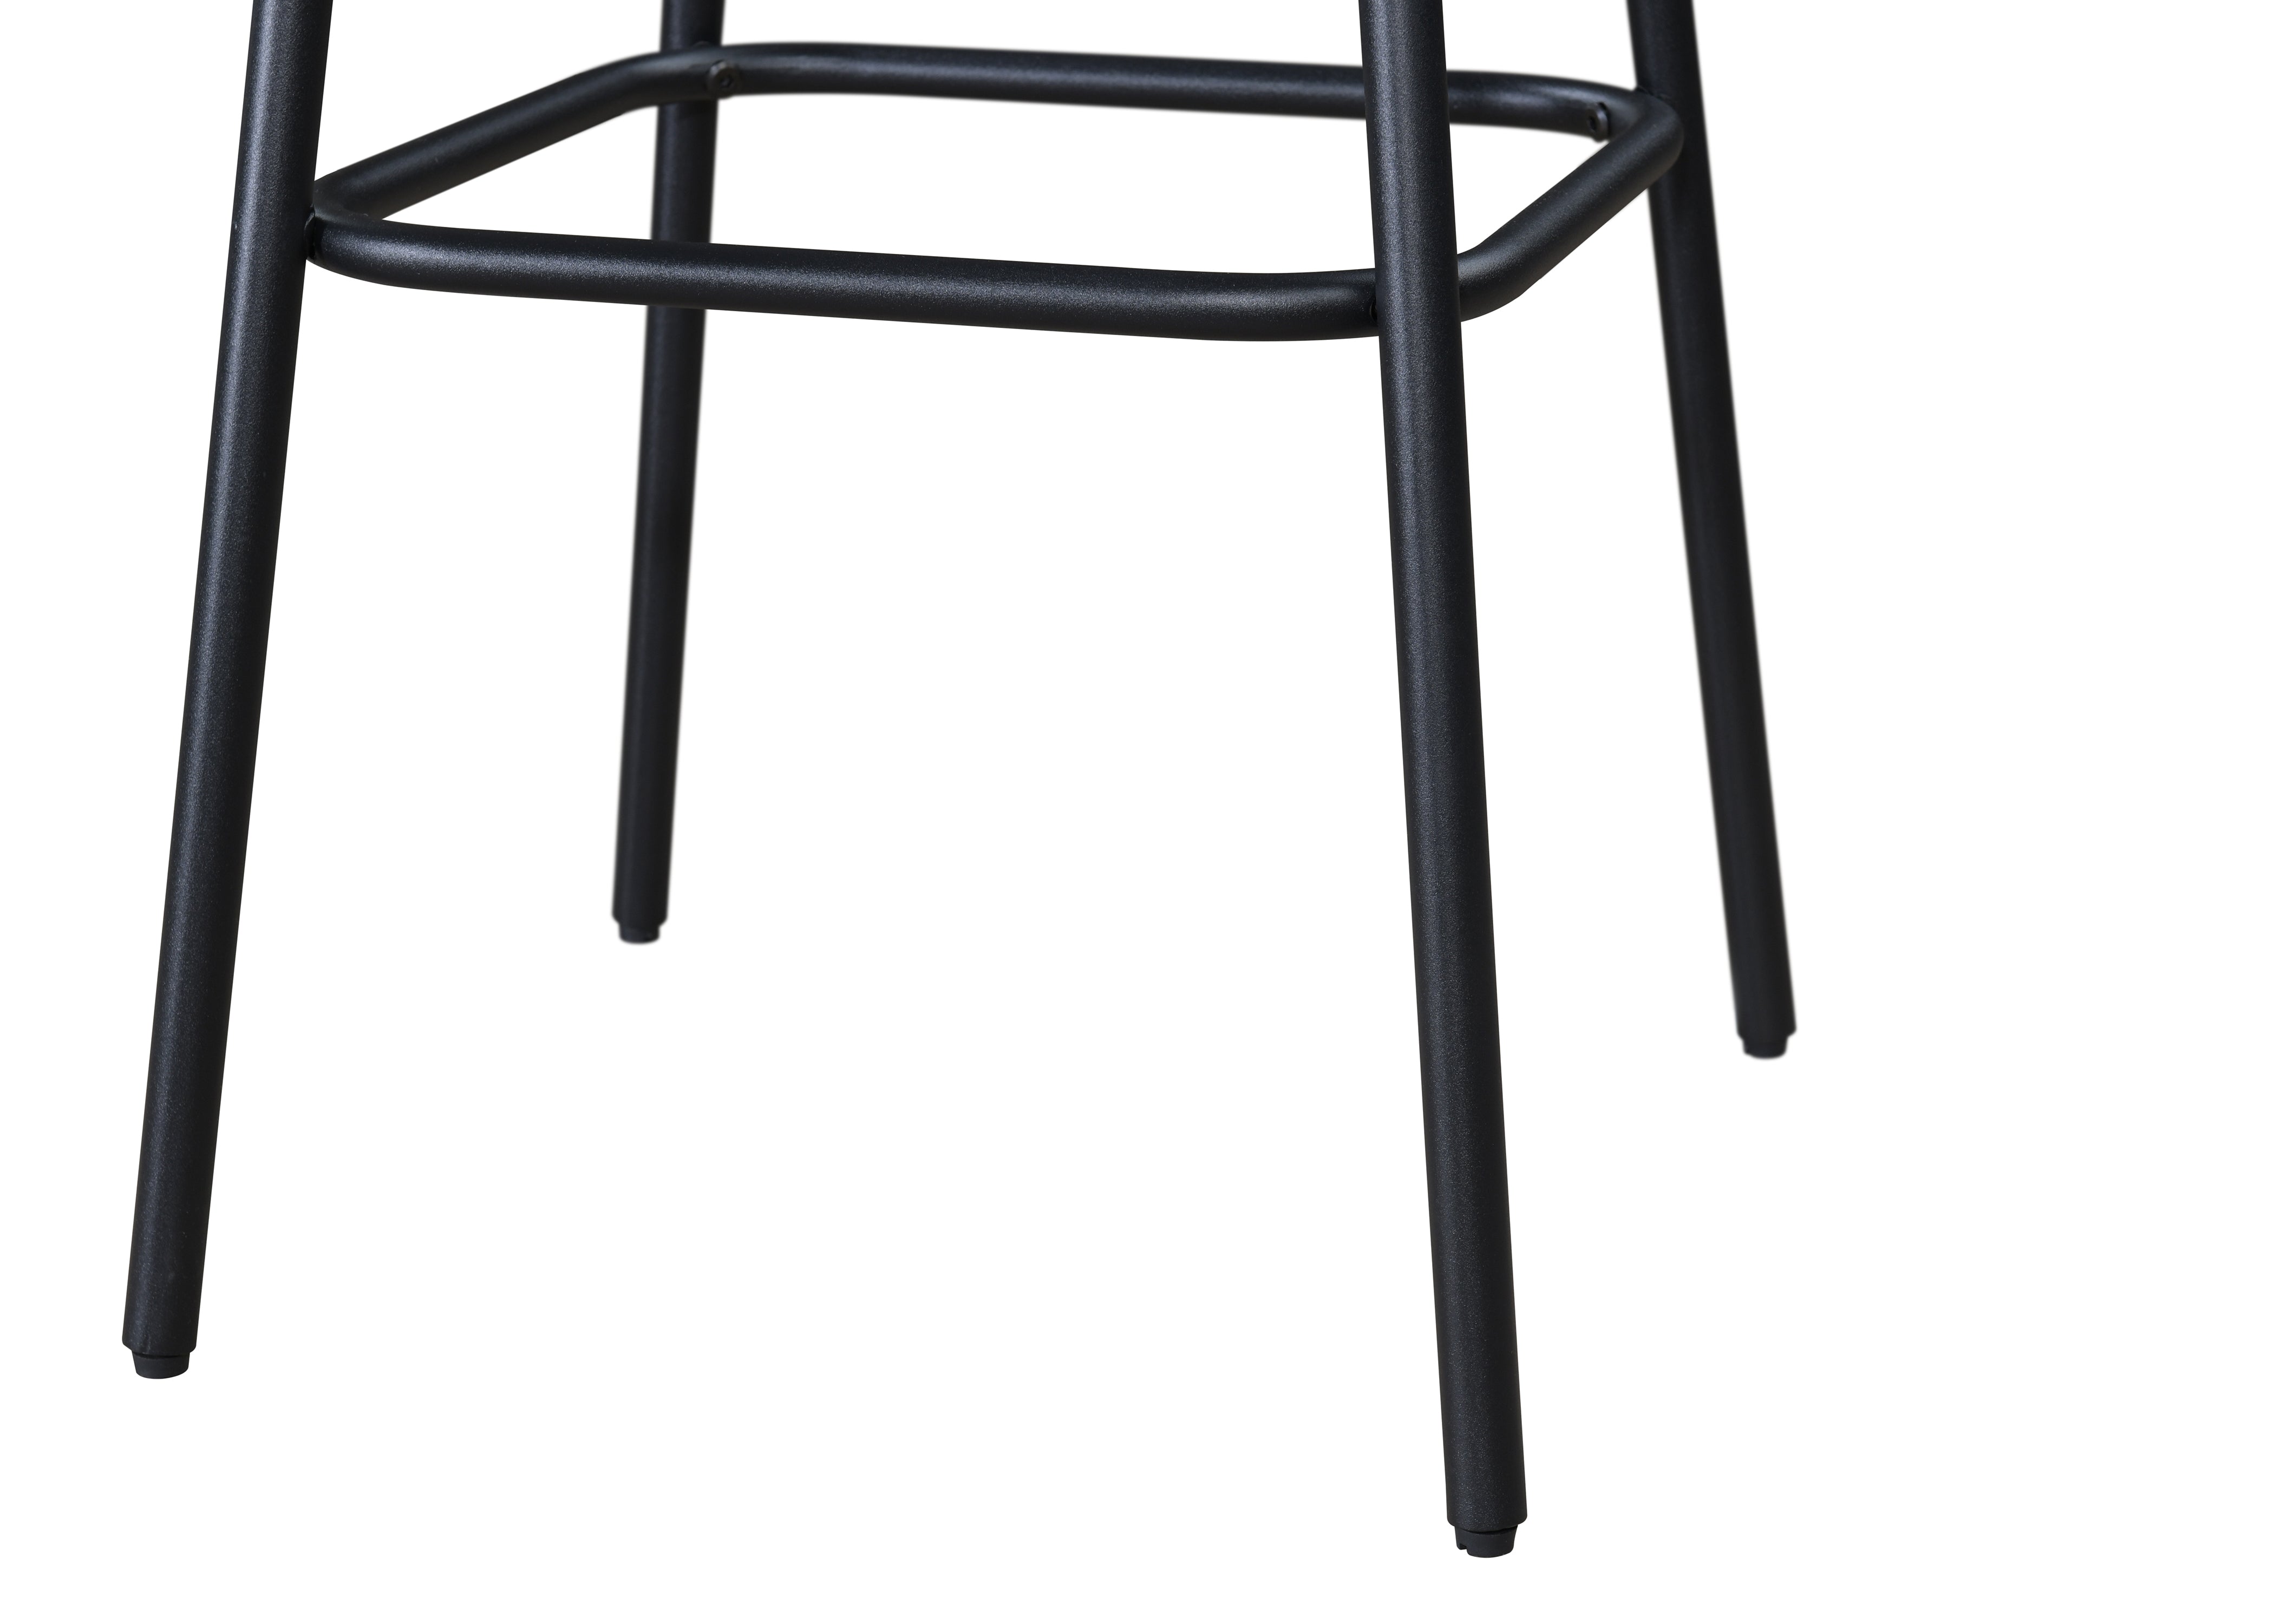 LuXeo Doheny Swivel Barstool - Black Steel Legs With Upholstered Seat (Set of 2)